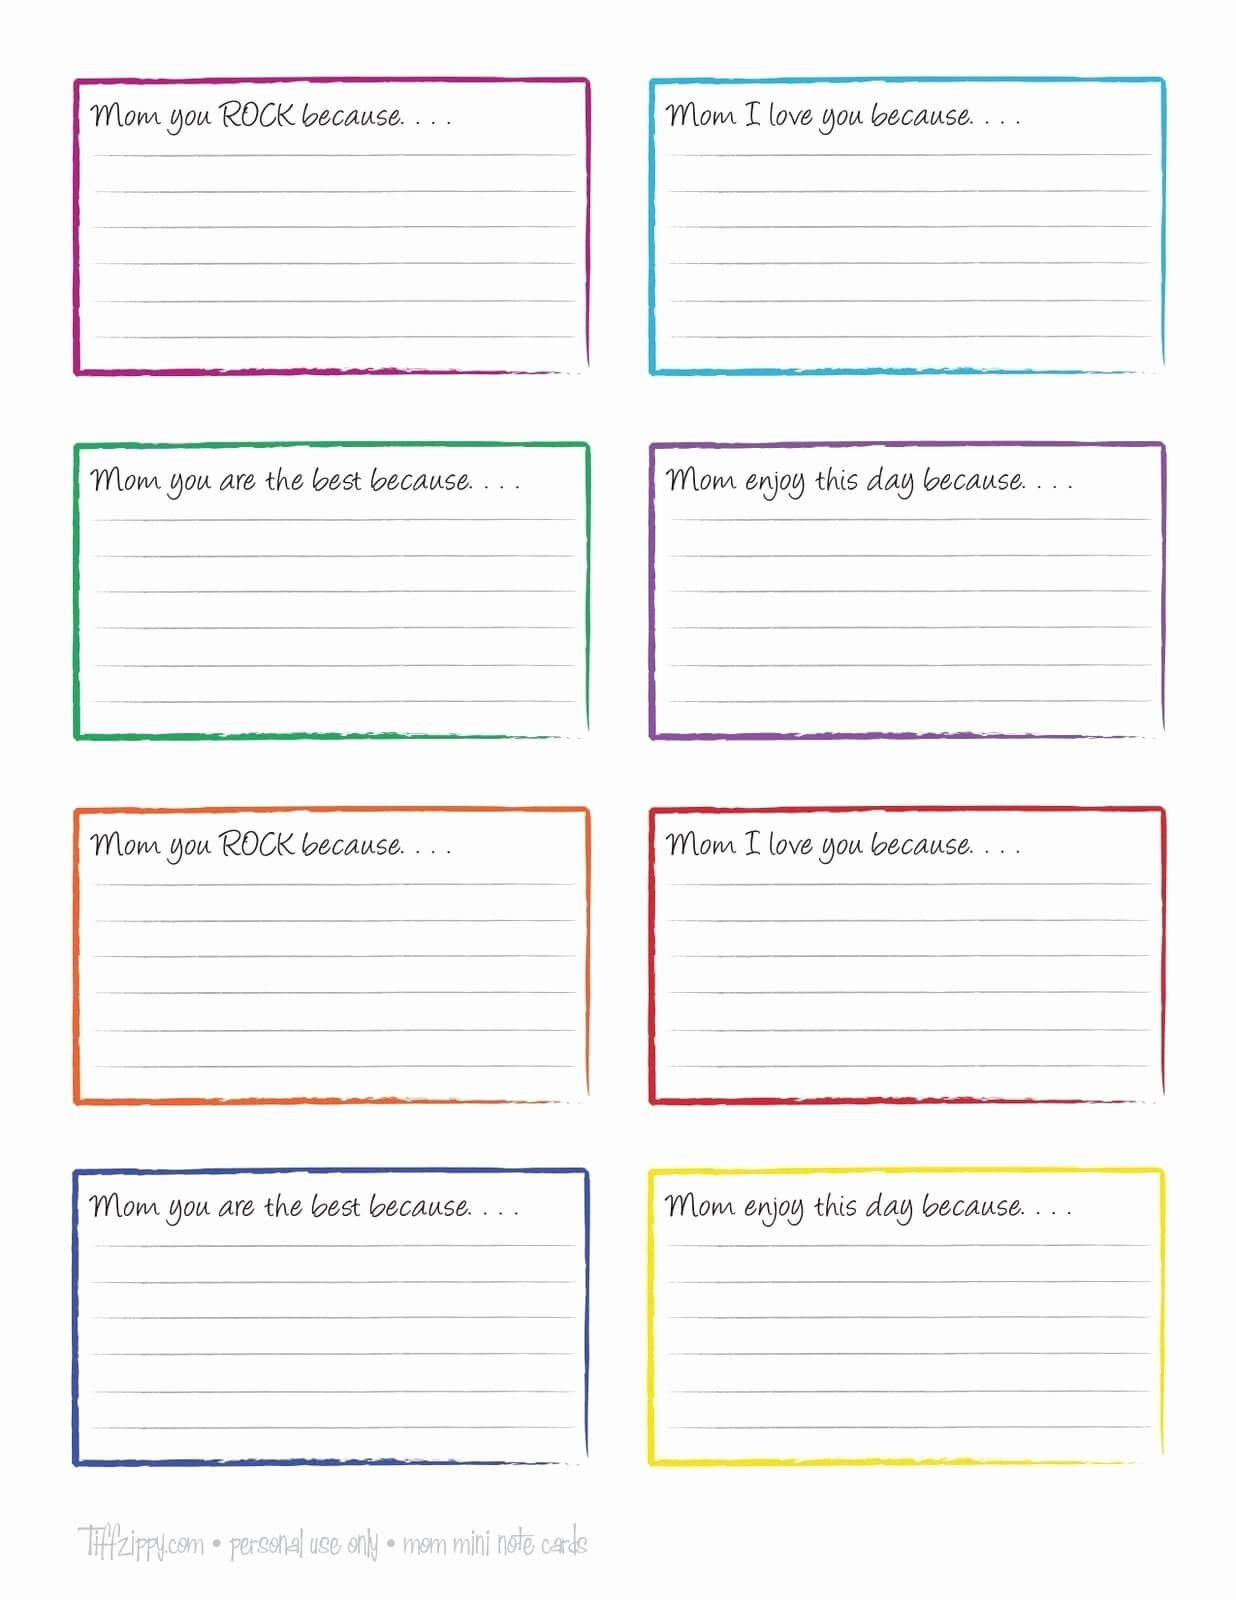 30 Note Card Template Google Docs | Pryncepality Throughout Blank Index Card Template